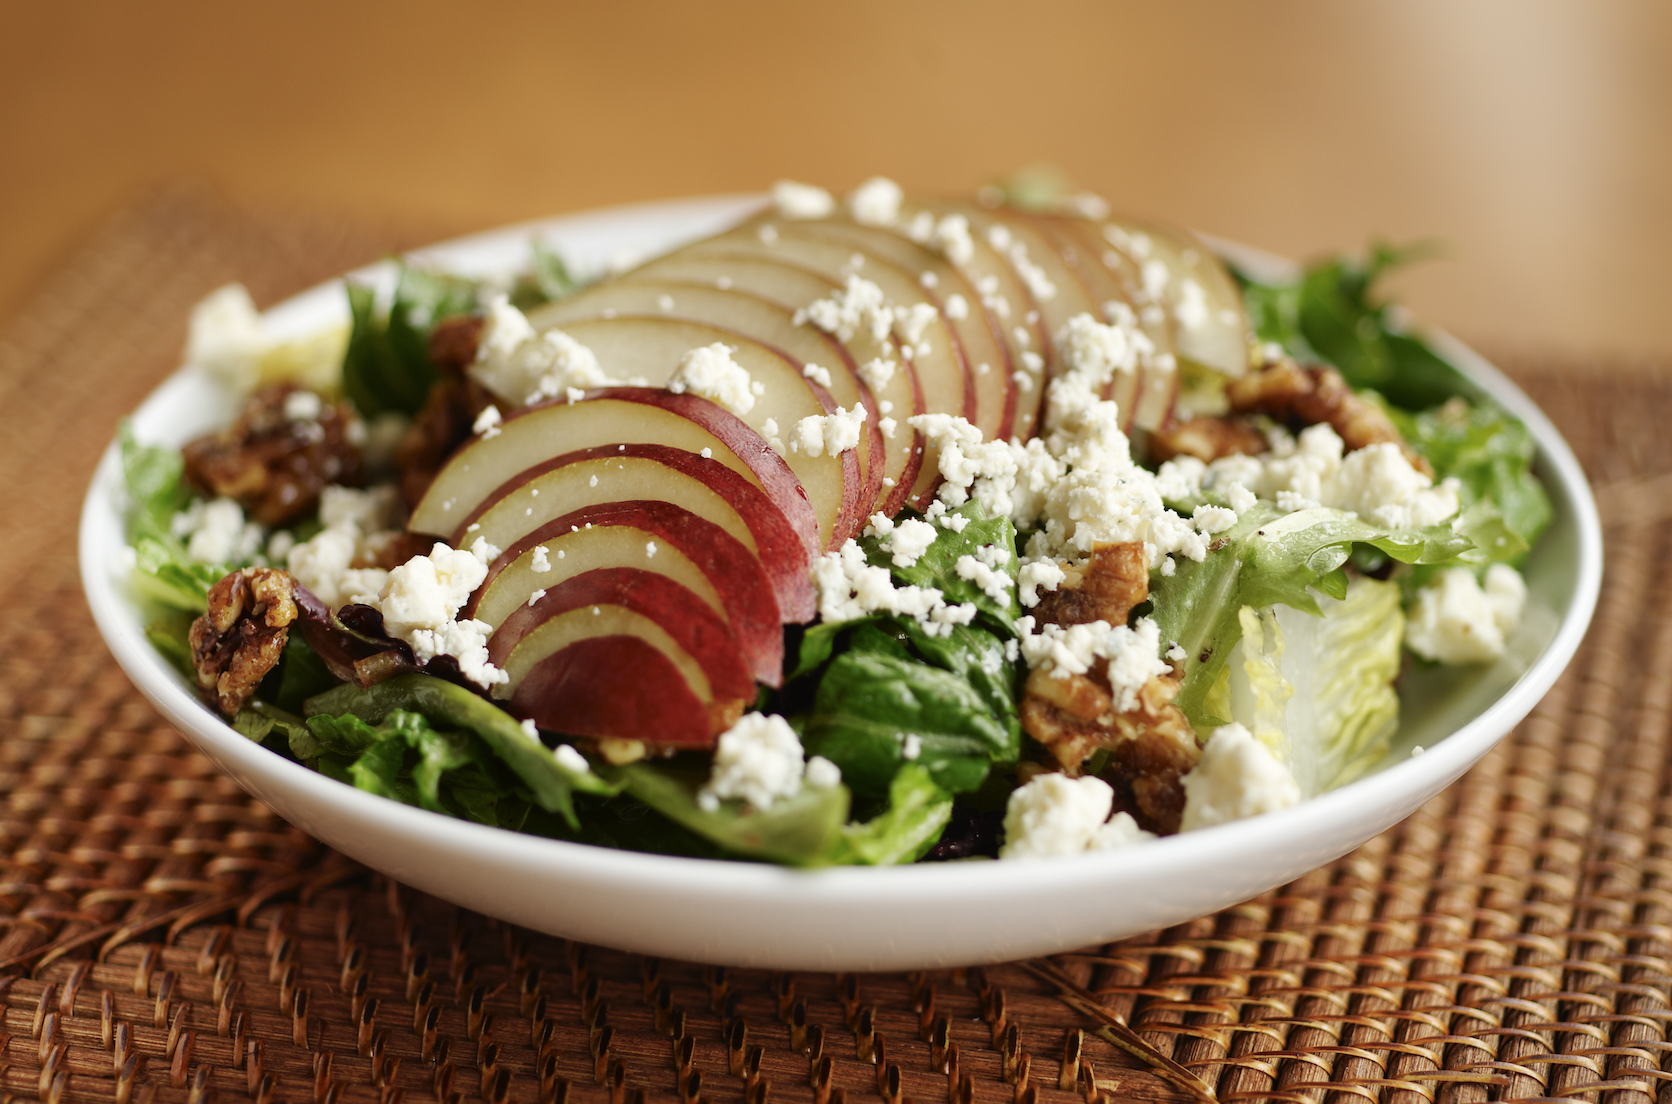 Mixed greens, with apples, walnuts, cheese crumbles, and vinaigrette